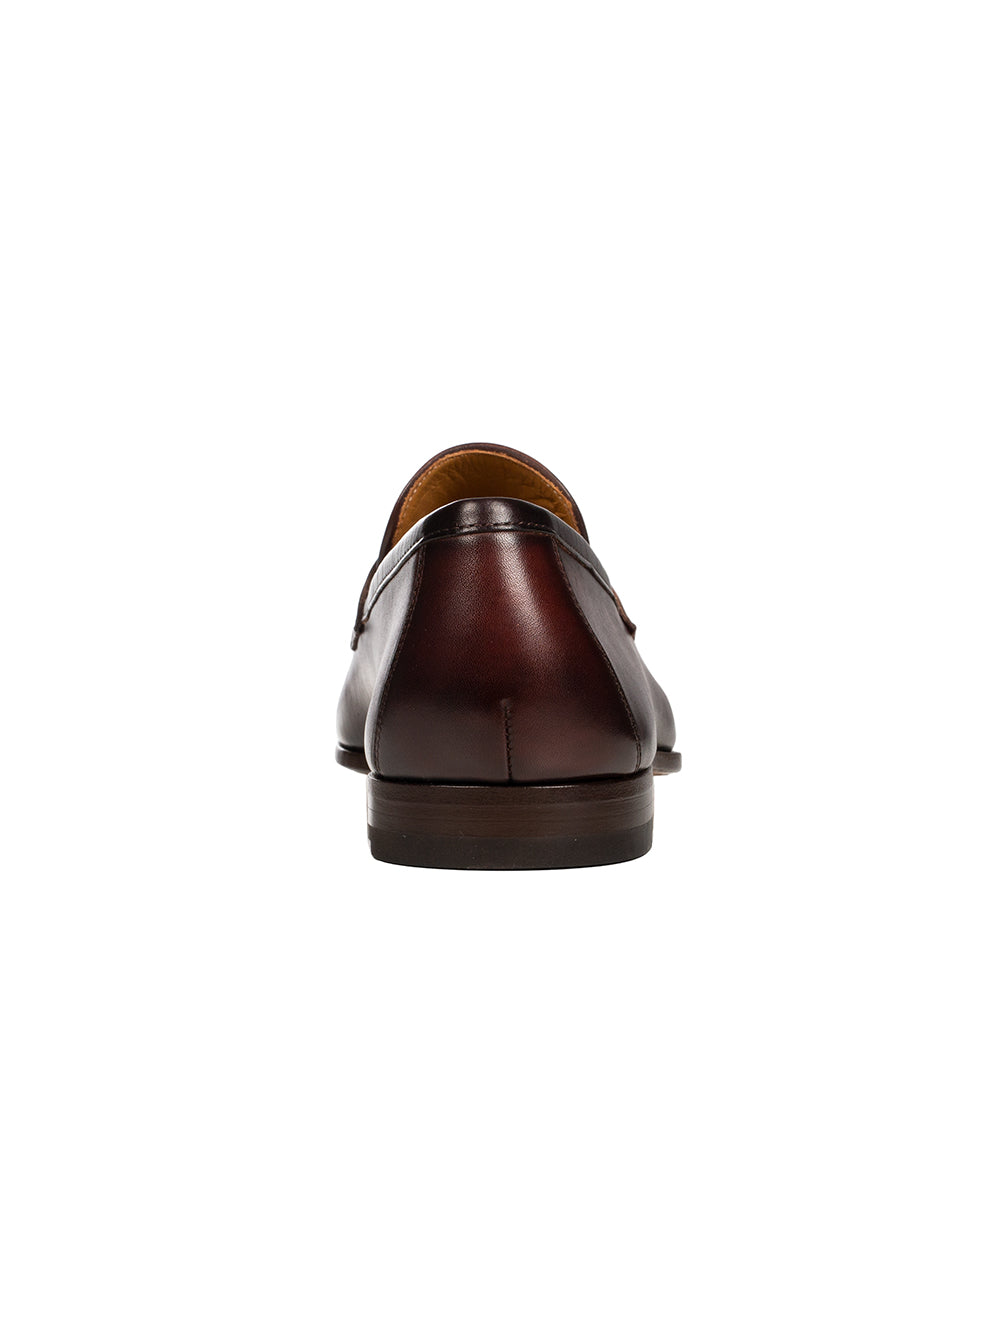 Leather Slip On Shoes Midbrown